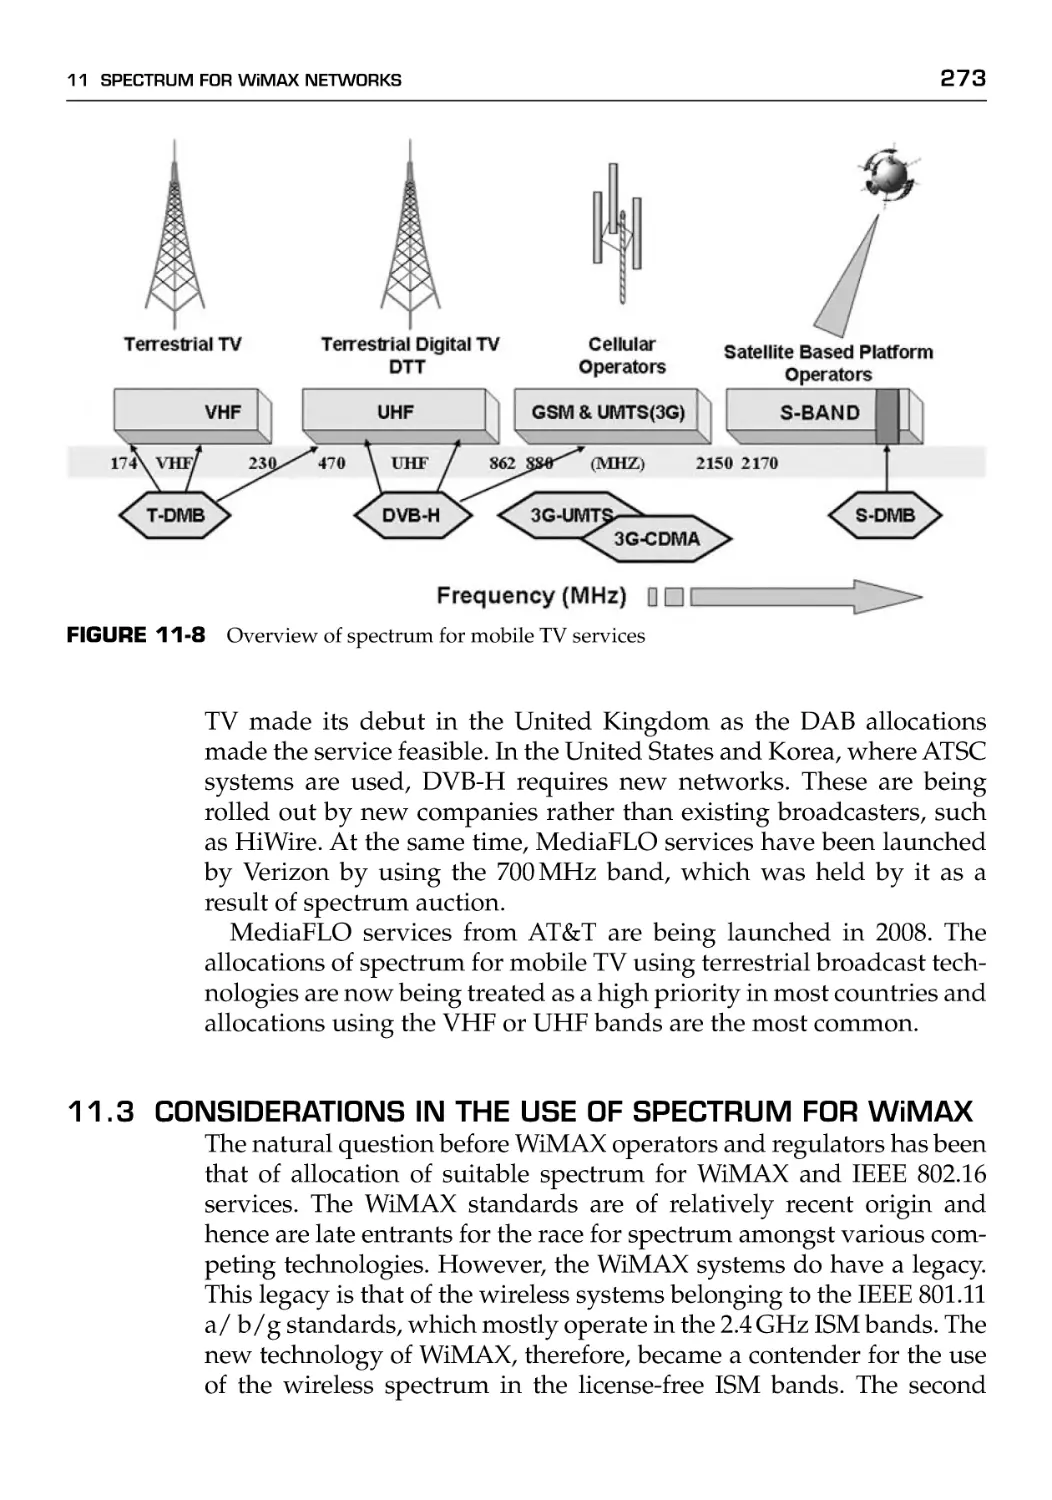 11.3 Considerations in the Use of Spectrum for WiMAX